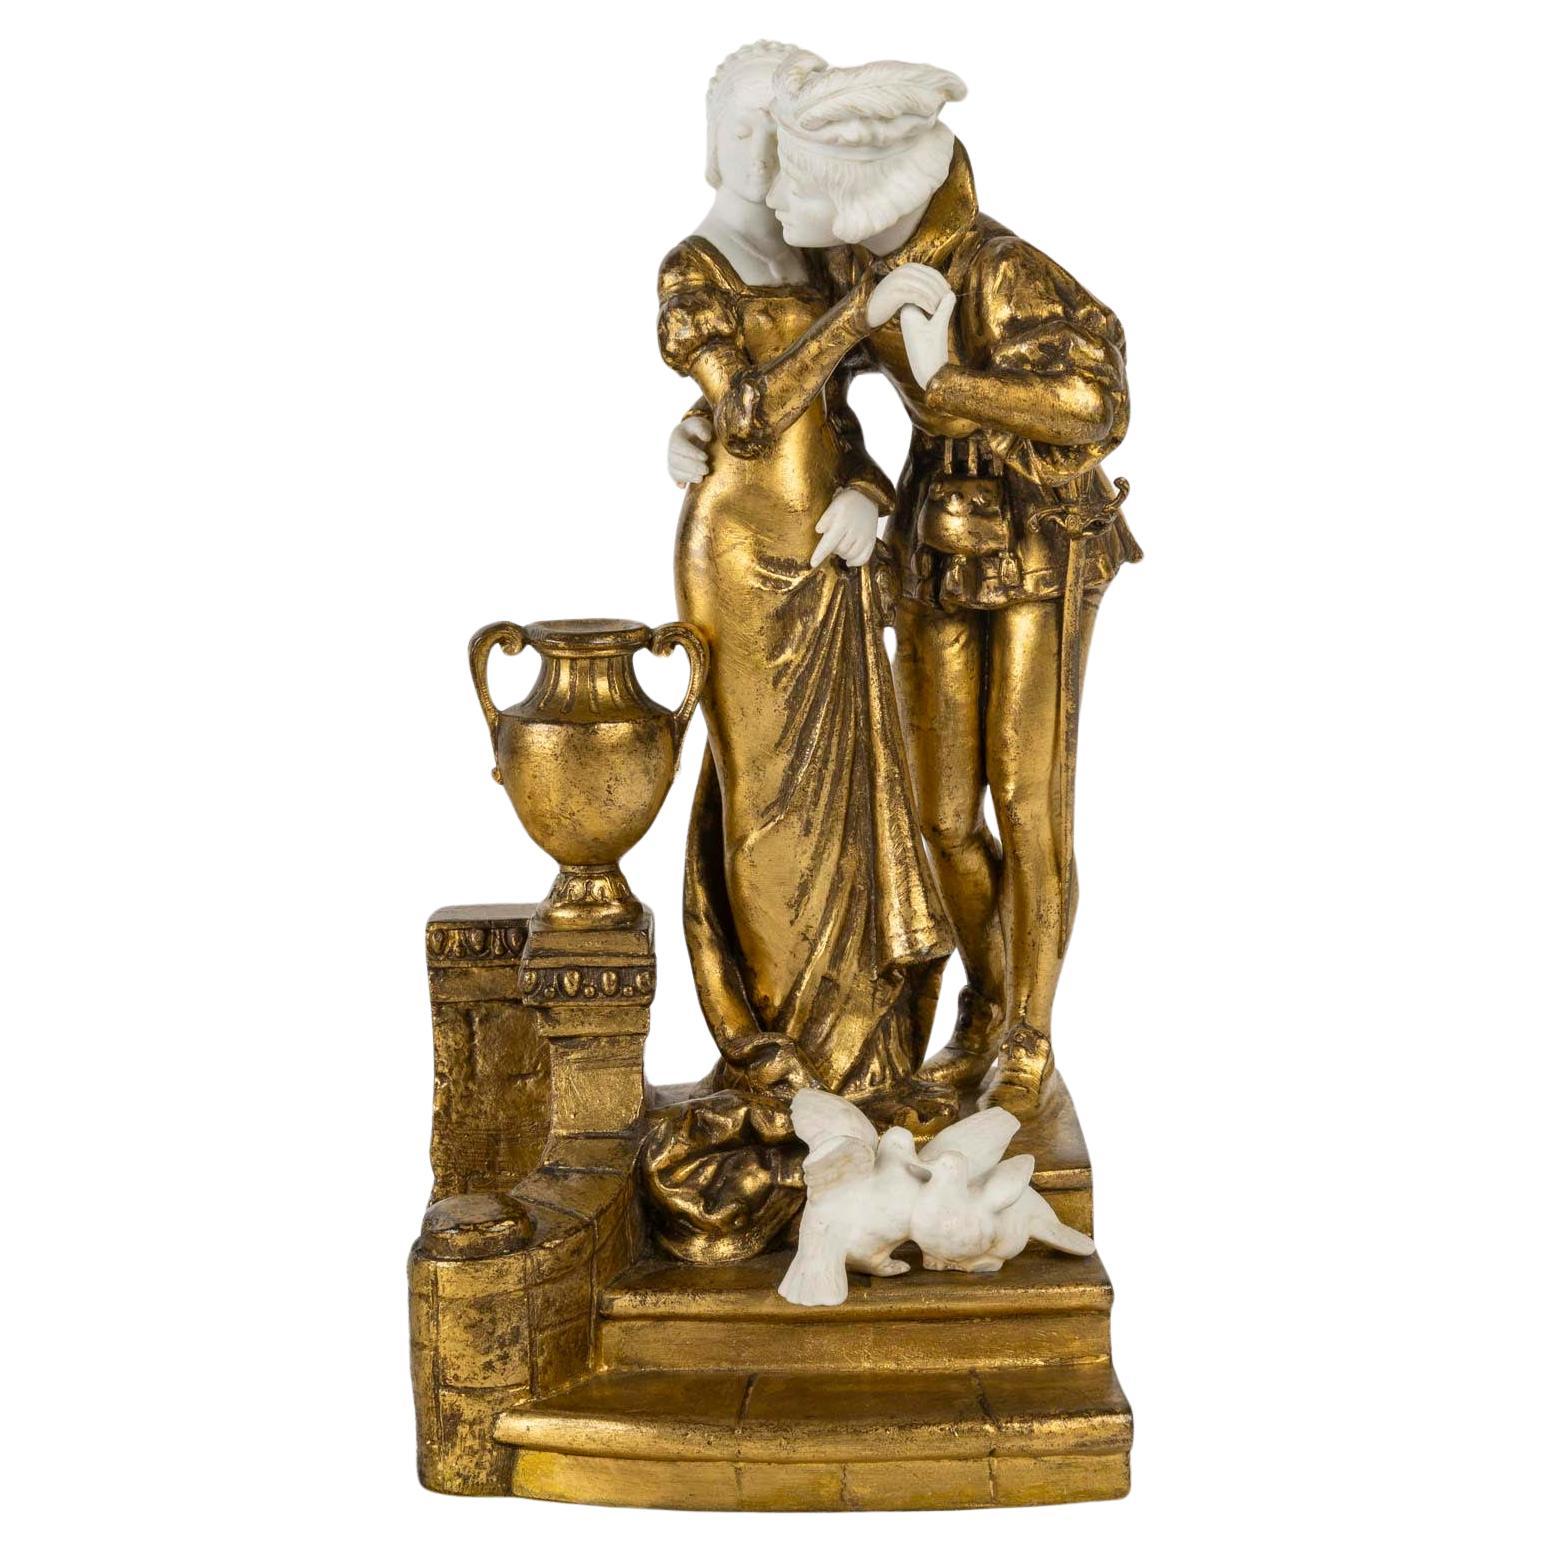 Sculpture in Gilded Bronze, Signed Alonzo, 19th Century.